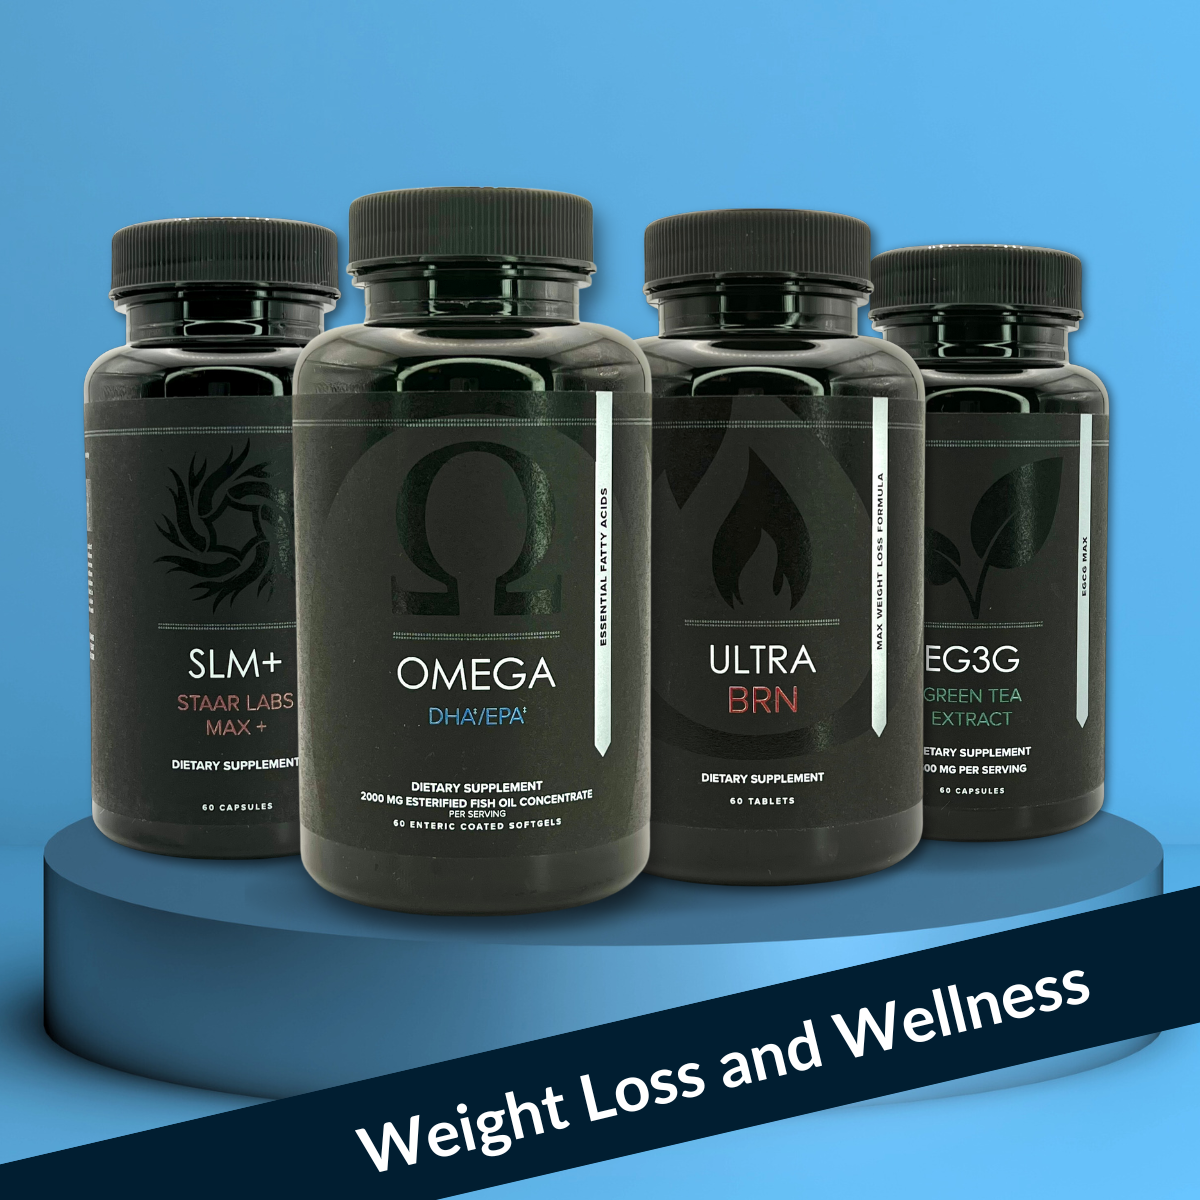 STAAR LABS Weight Loss and Wellness Package